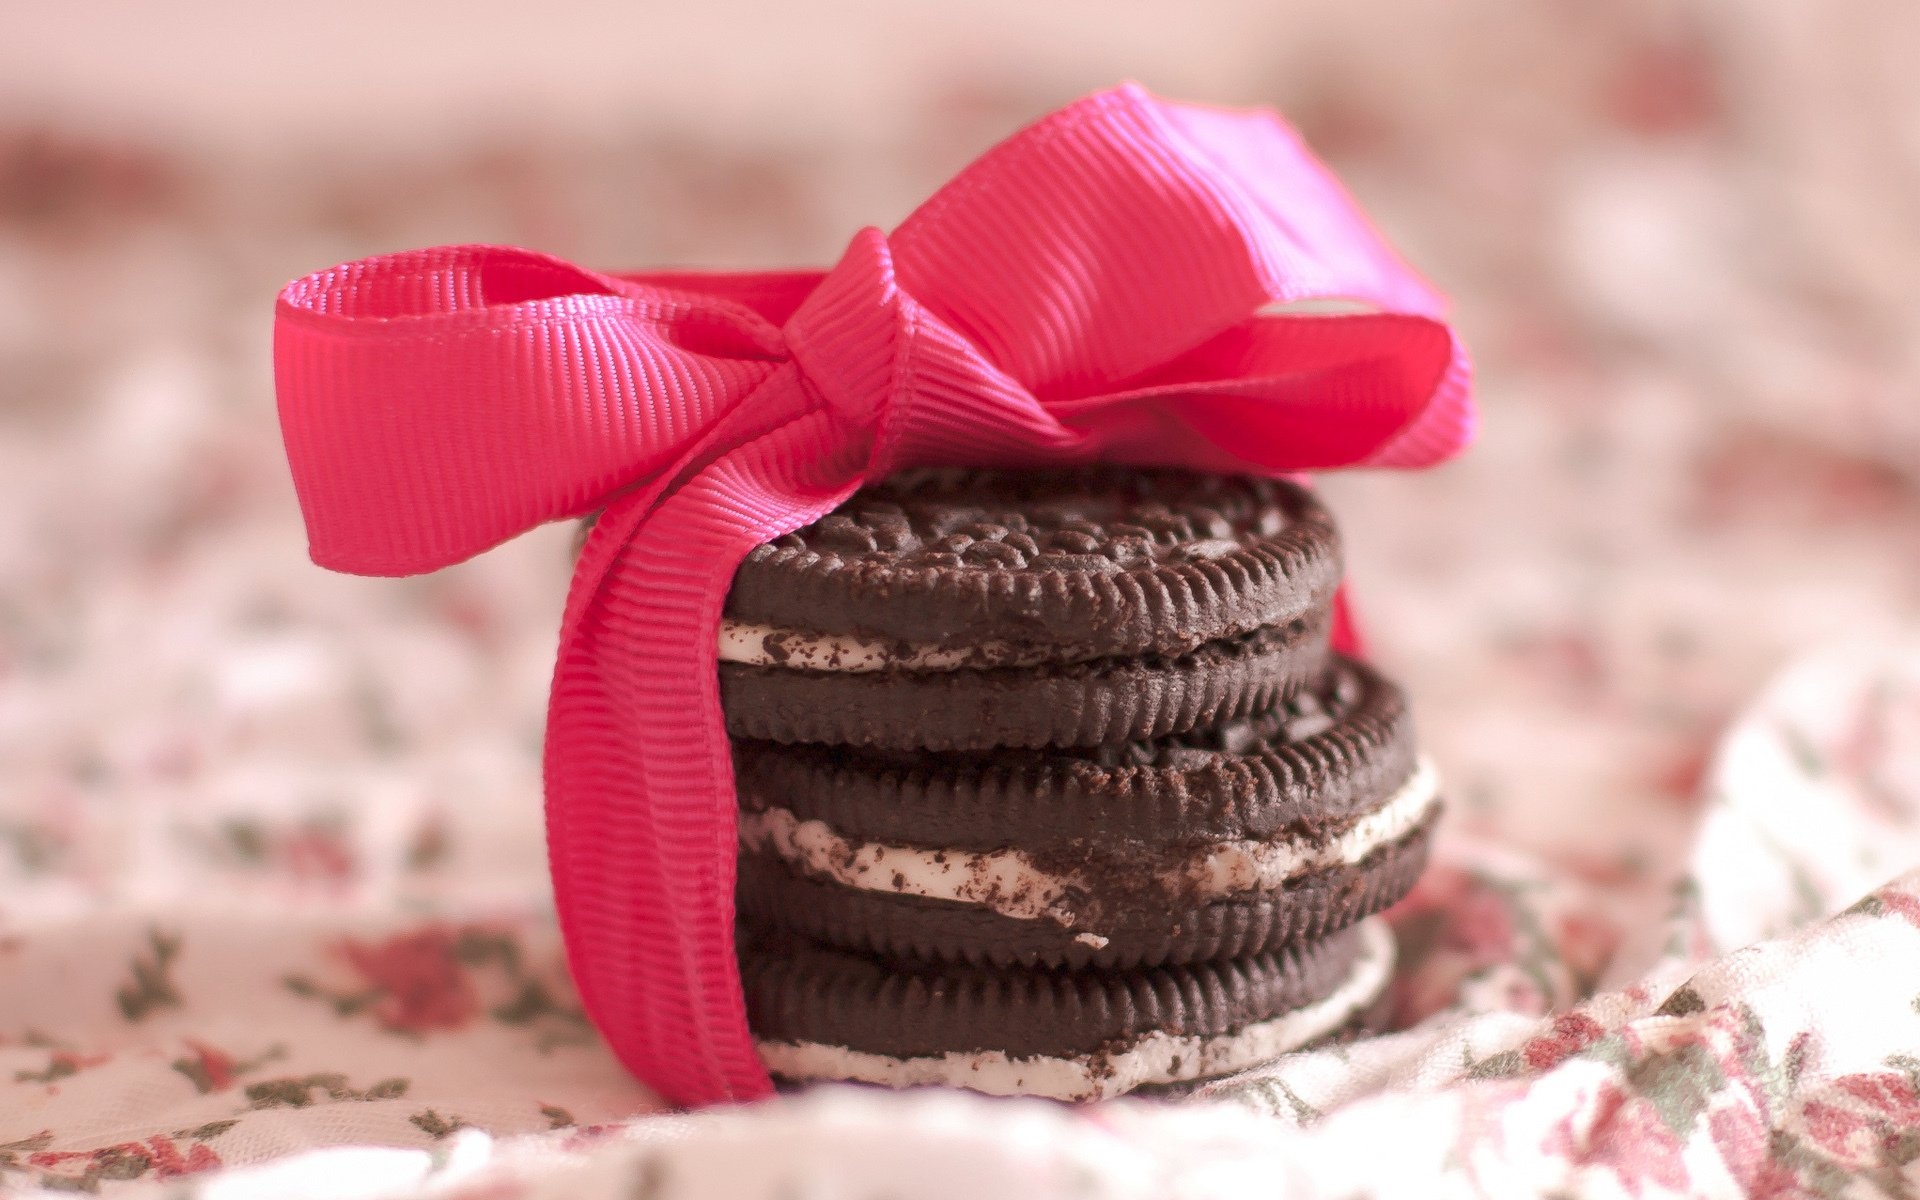 Oreo Cookies: Biscuit, Inspired by its predecessor, the Hydrox cookie. 1920x1200 HD Wallpaper.